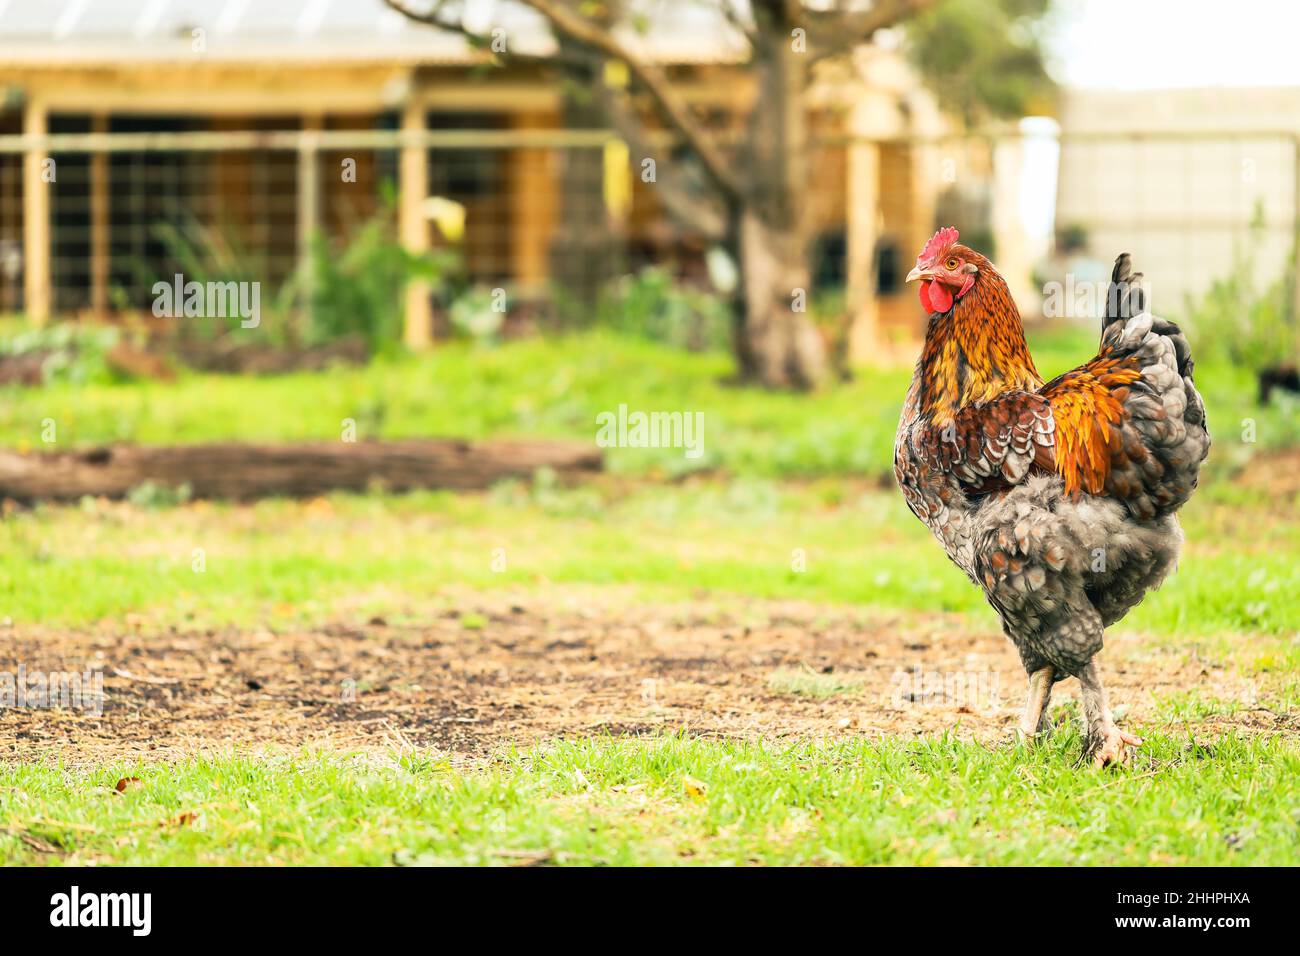 Shallow focus shot of a chicken walking in the backyard garden on a sunny day Stock Photo